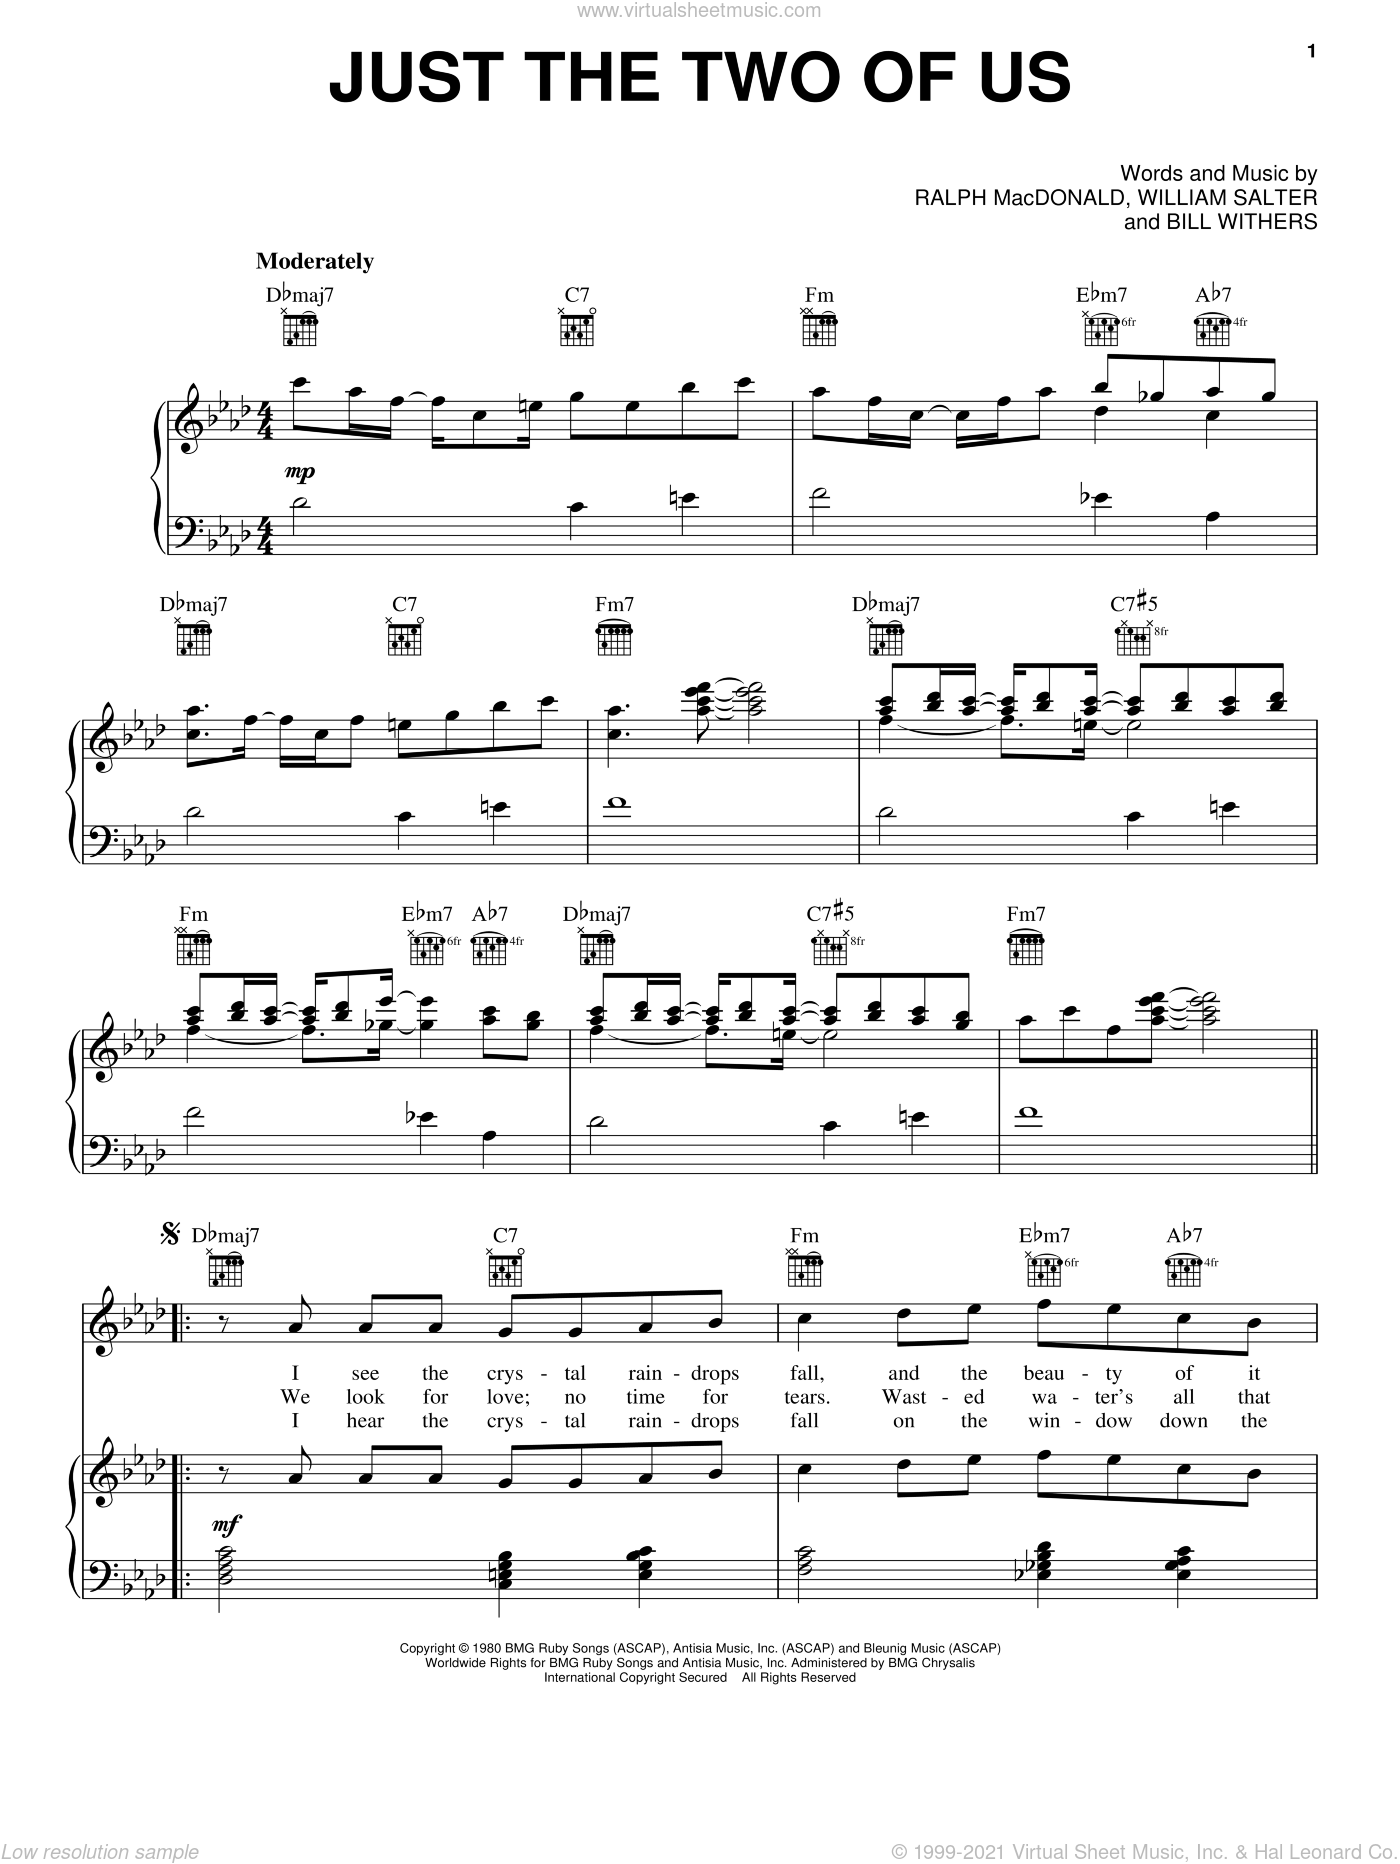 Grover Washington Jr. Just the Two of Us Sheet Music in F Minor  (transposable) - Download & Print - SKU: MN0118226